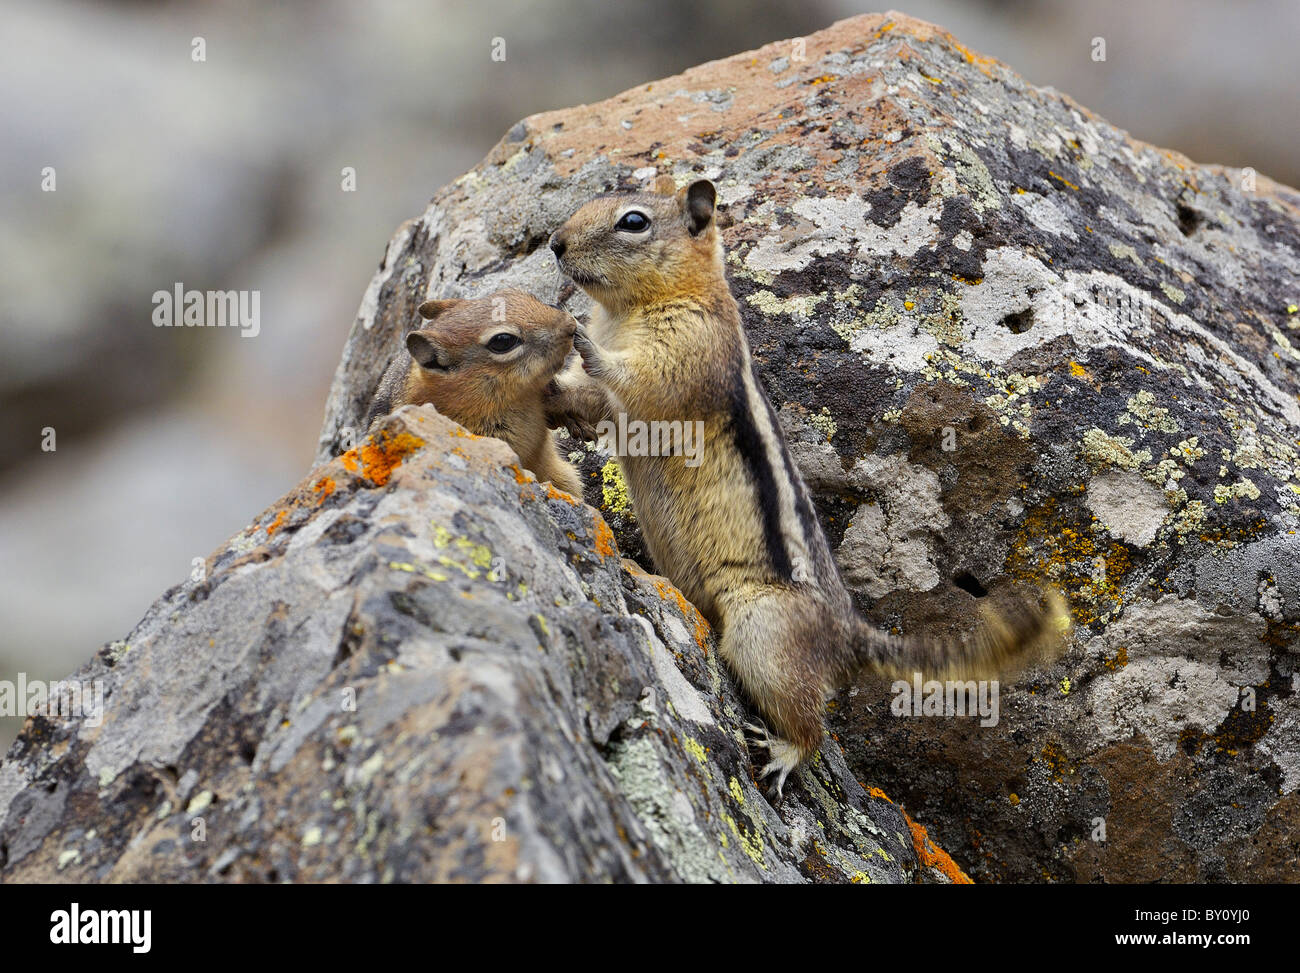 Golden-mantled Ground Squirrels playing and loving. Stock Photo